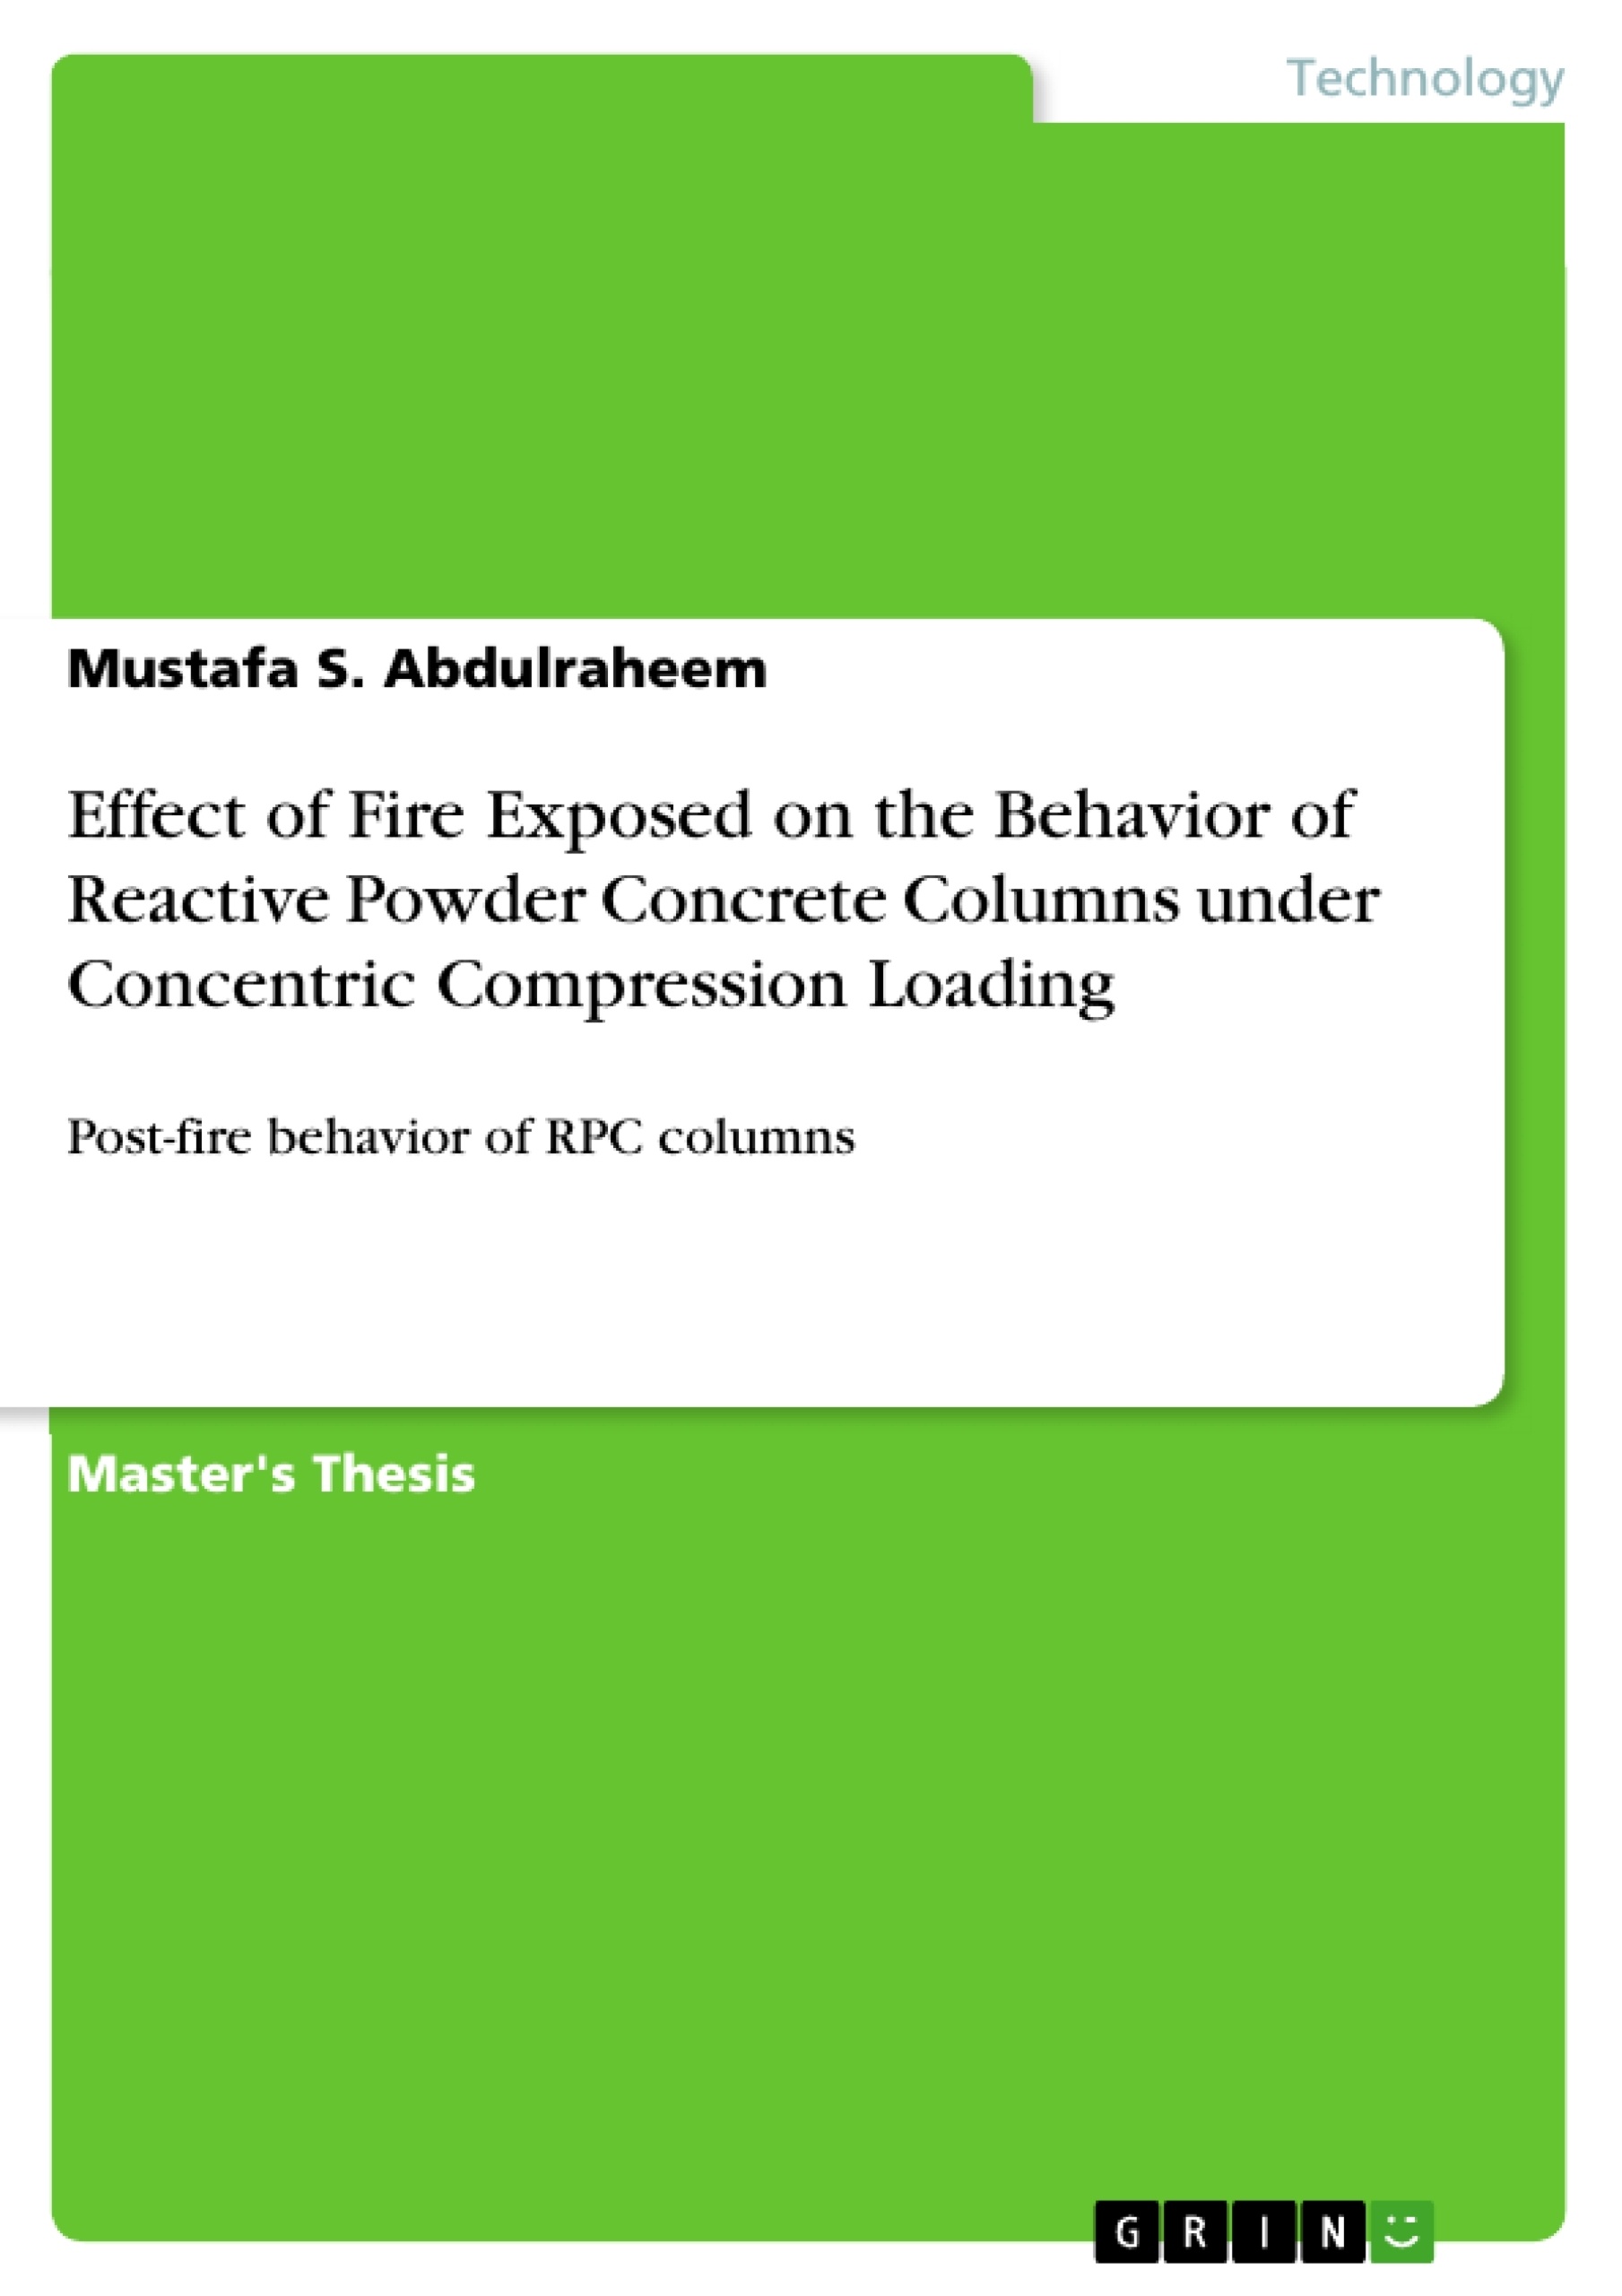 Title: Effect of Fire Exposed on the Behavior of  Reactive Powder Concrete Columns under Concentric Compression Loading